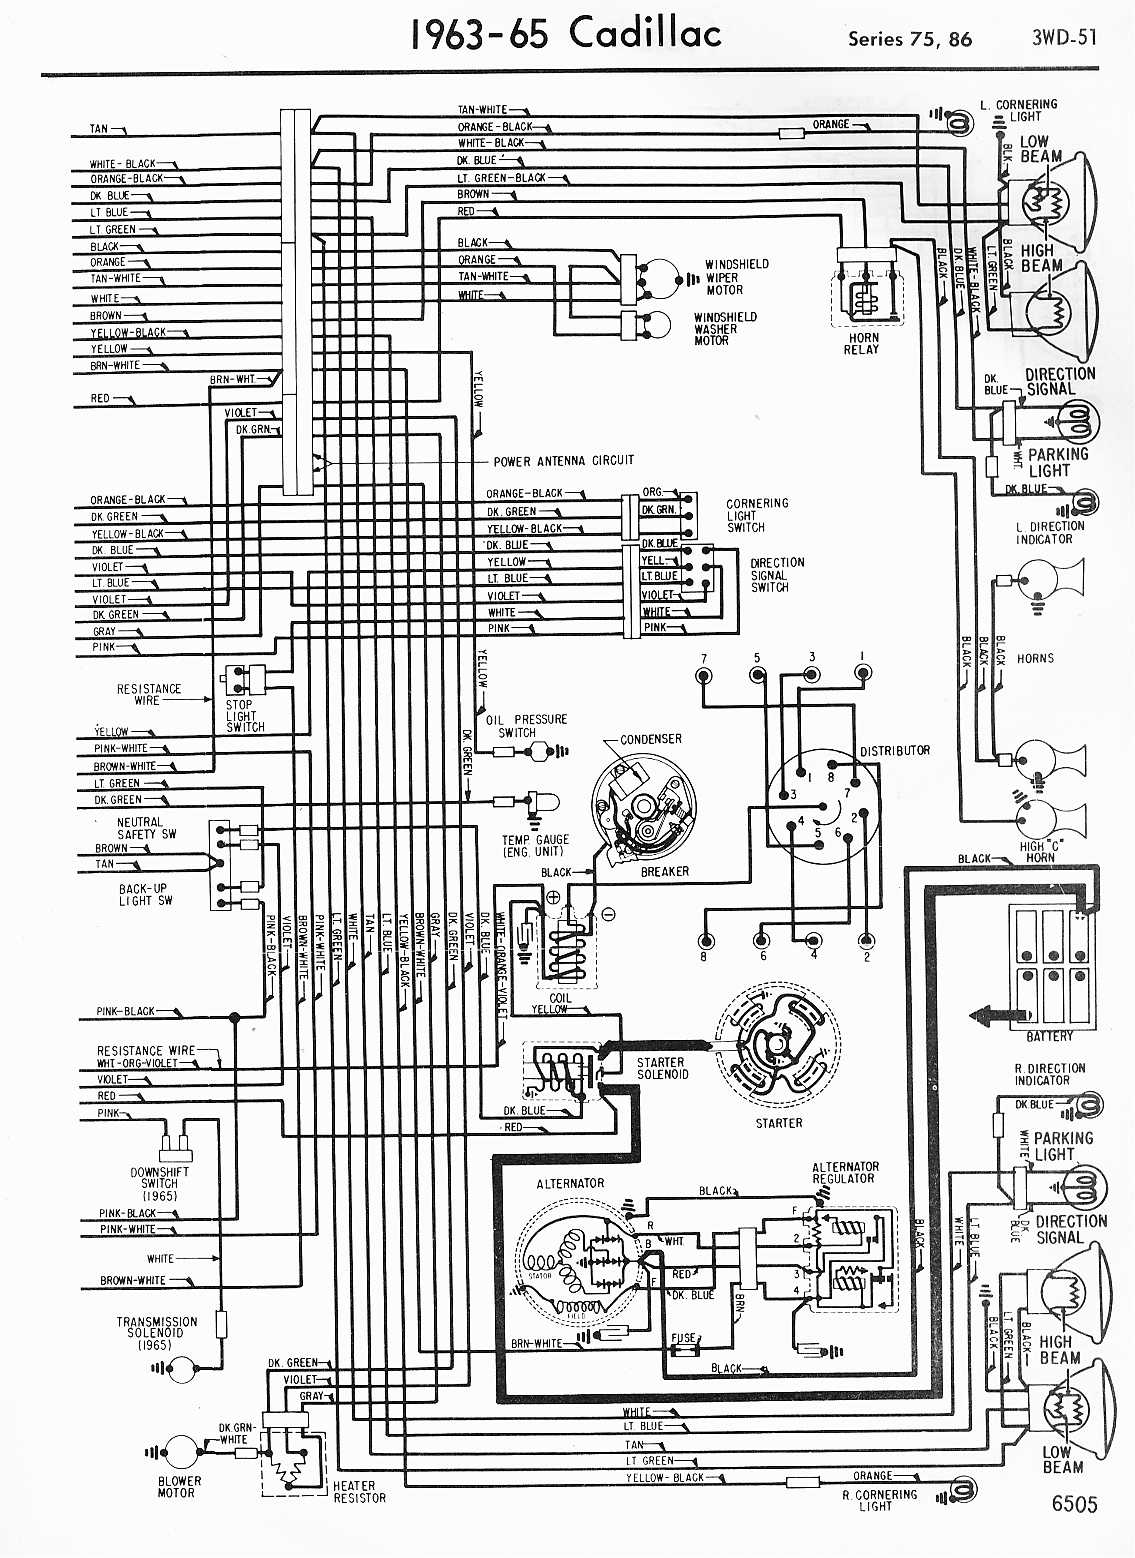 2007 Cadillac Escalade Radio Wiring Diagram from www.oldcarmanualproject.com